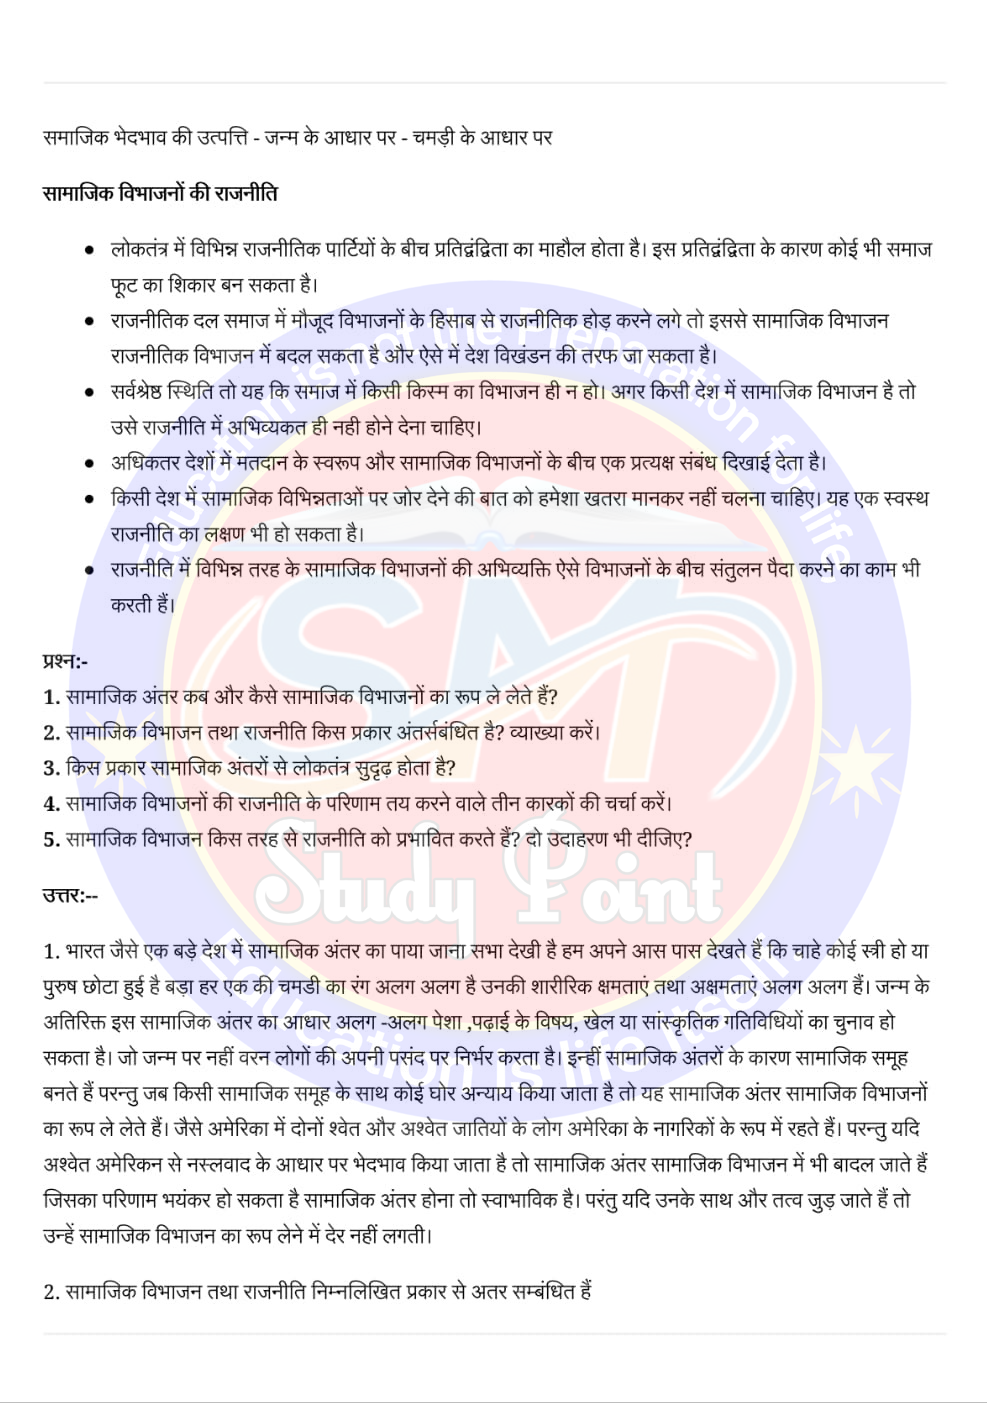 Class 10th Political Science Notes in Hindi | Political Science Notes PDF Download | Bihar Board Class 10 Political Science Notes Free Download